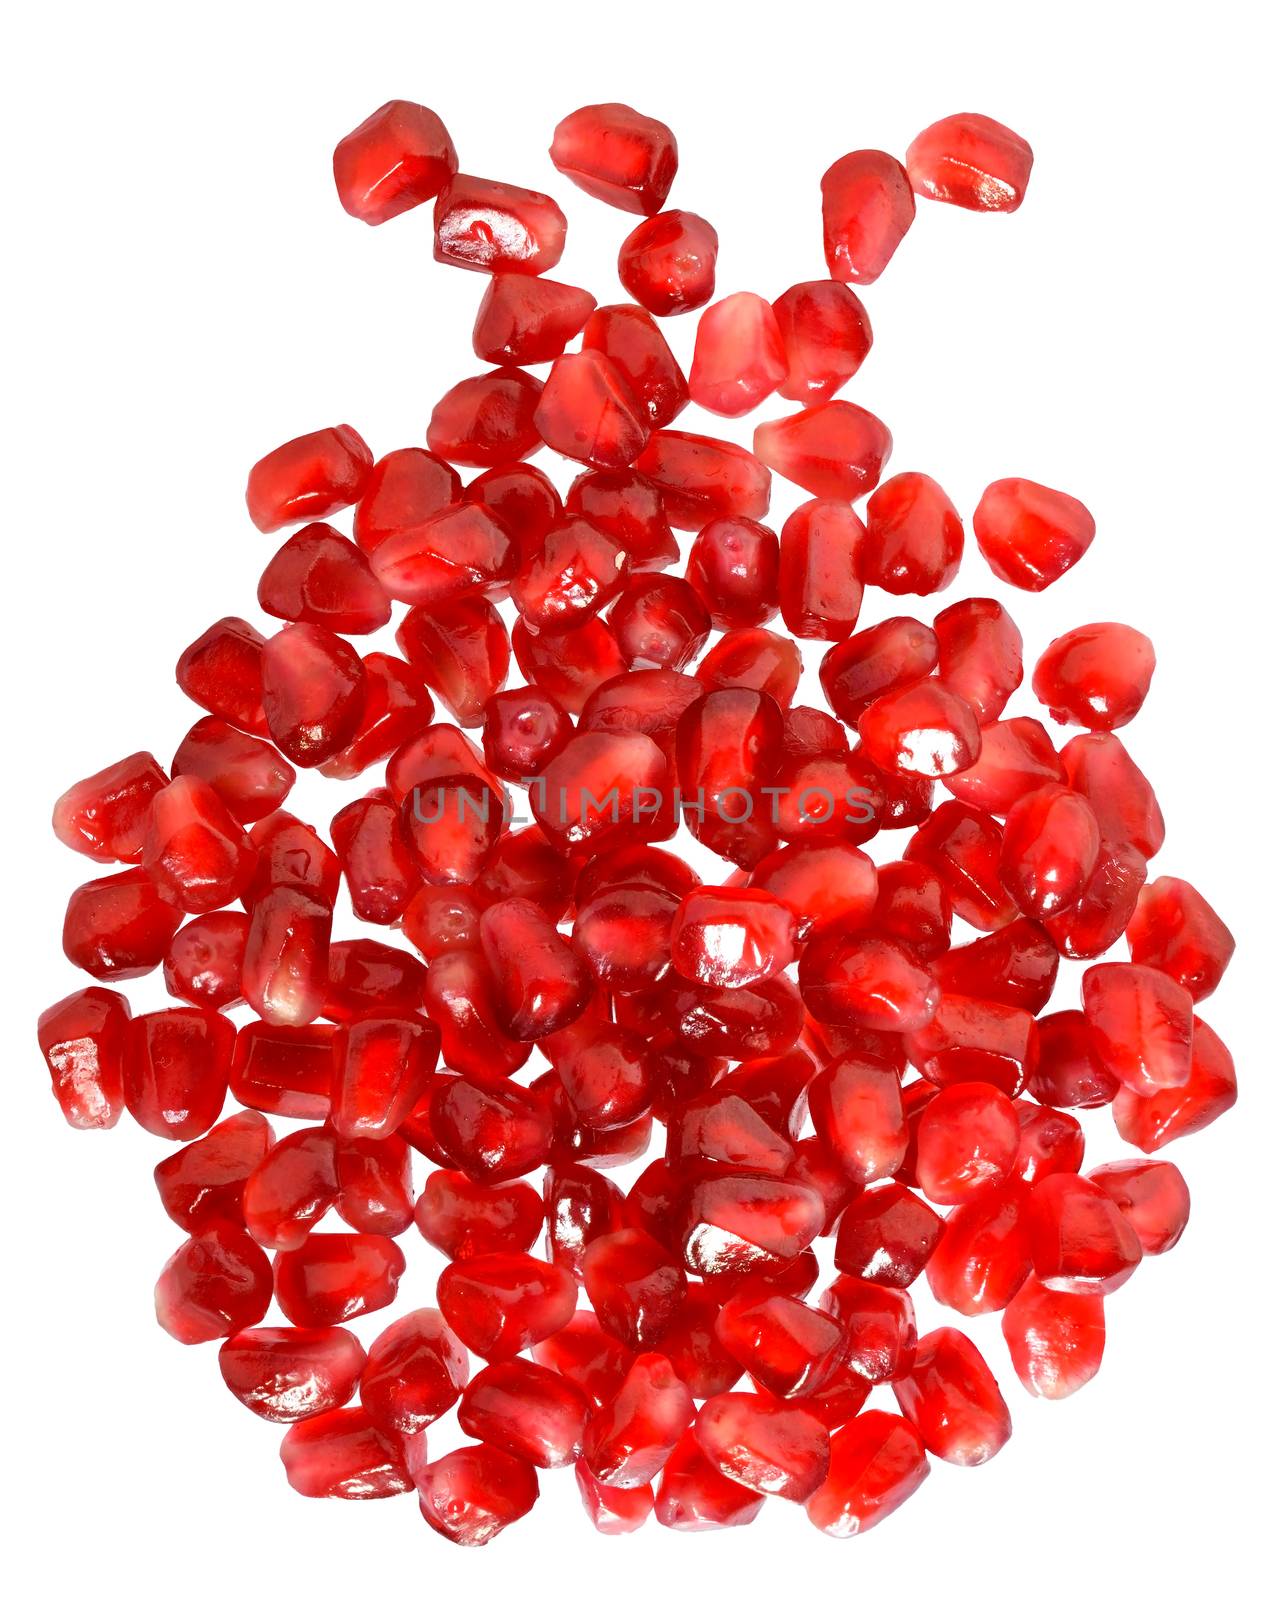 Cut the pomegranate with scattered grain isolated on white background.